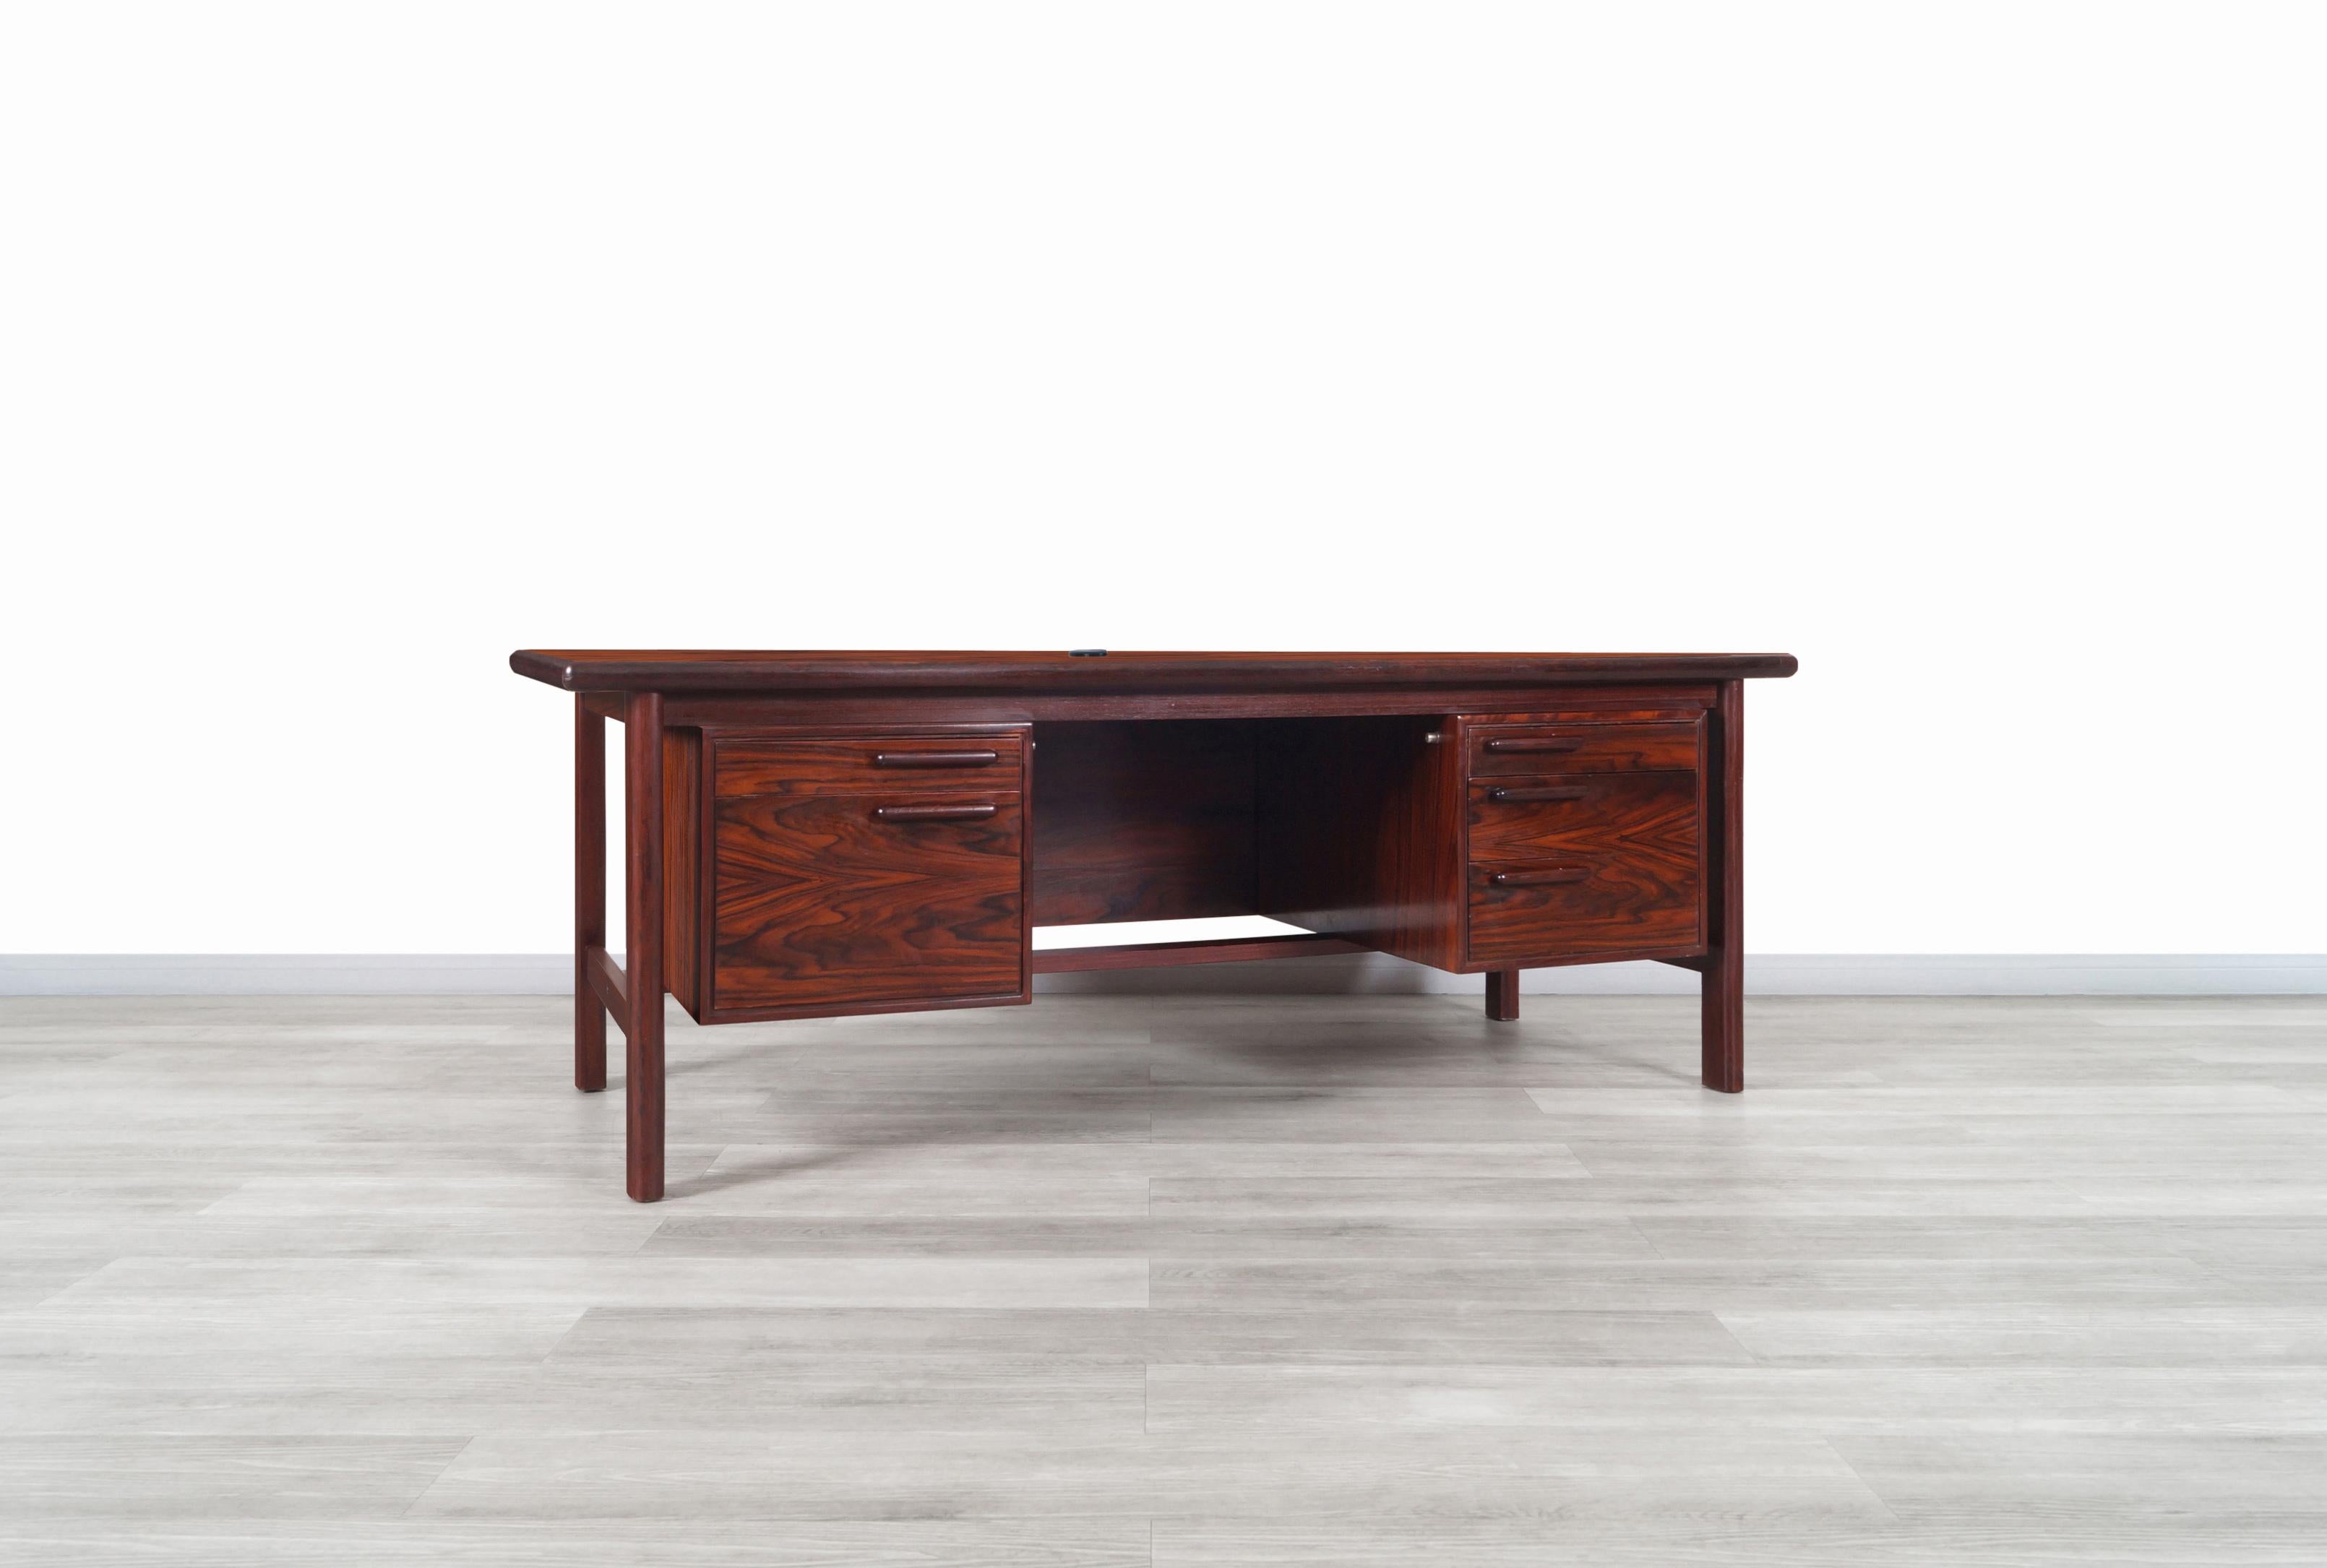 Exceptional Danish modern executive rosewood desk manufactured by H.P. Hansen in Denmark, circa 1960s. This desk is built from the highest quality Brazilian rosewood. We can appreciate the stunning grains of the wood throughout the entire structure